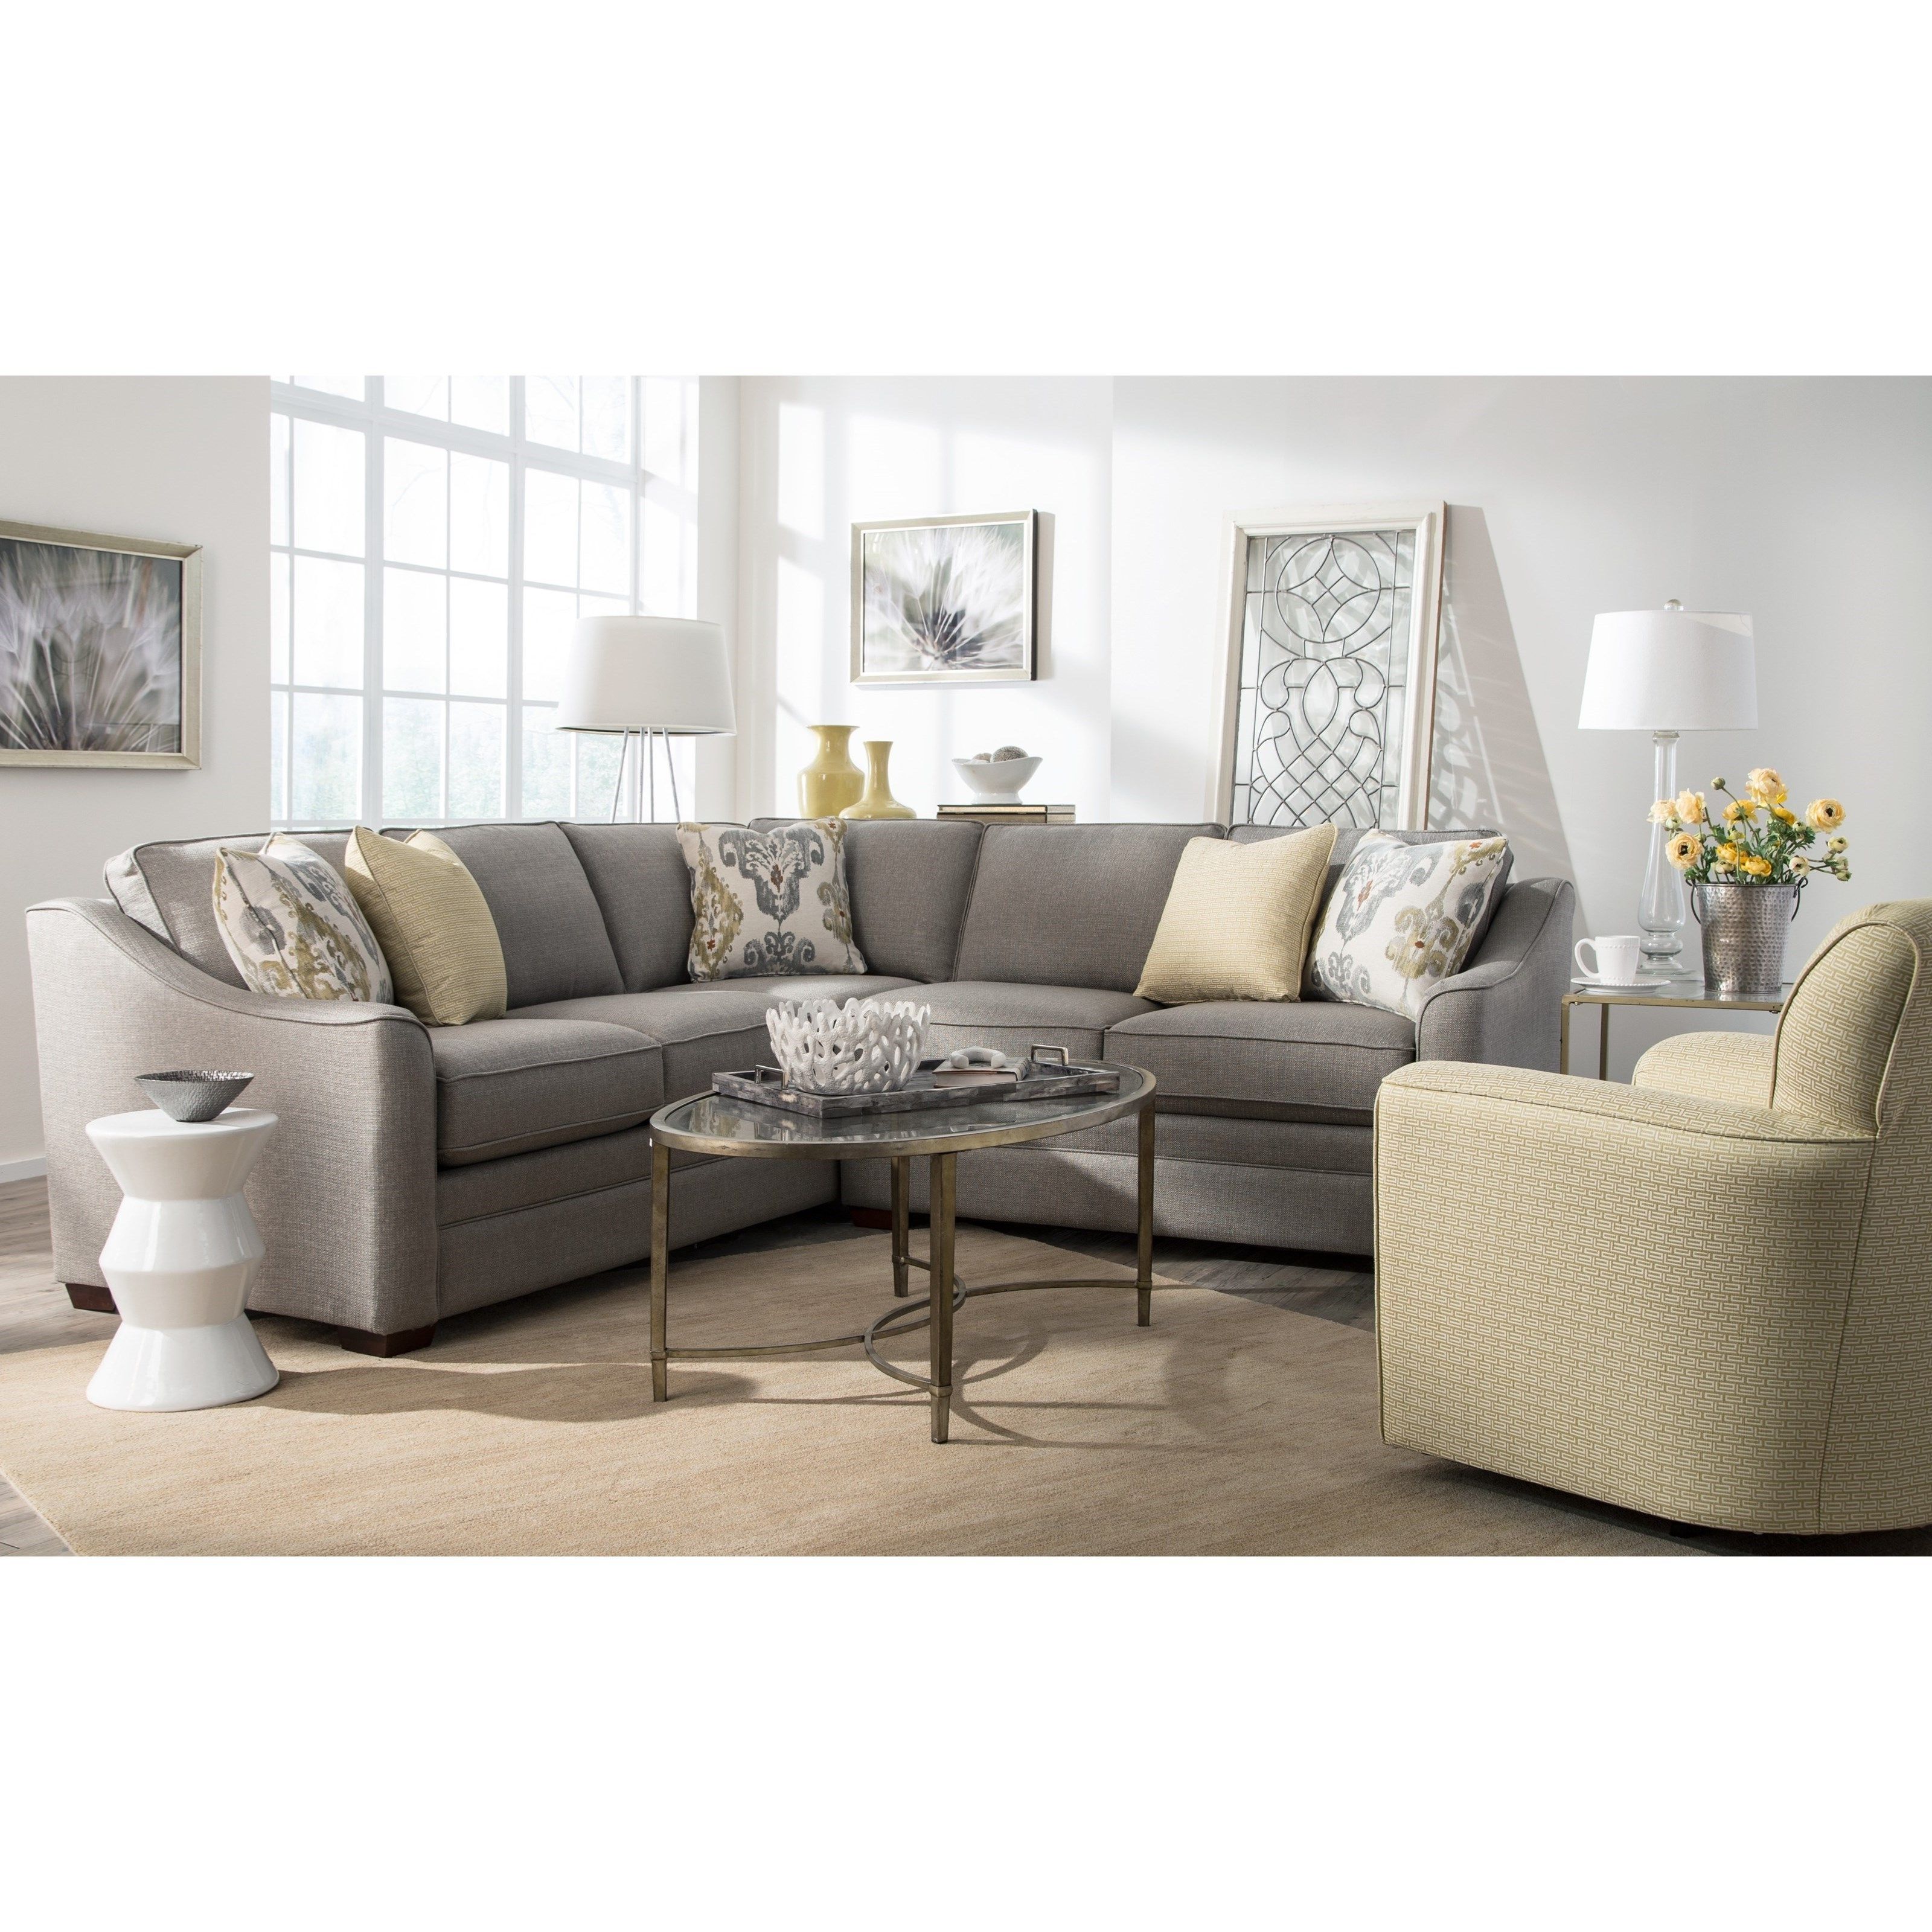 Trendy Two Piece Customizable Corner Sectional Sofa With Left Return Within Gardiners Sectional Sofas (View 5 of 15)